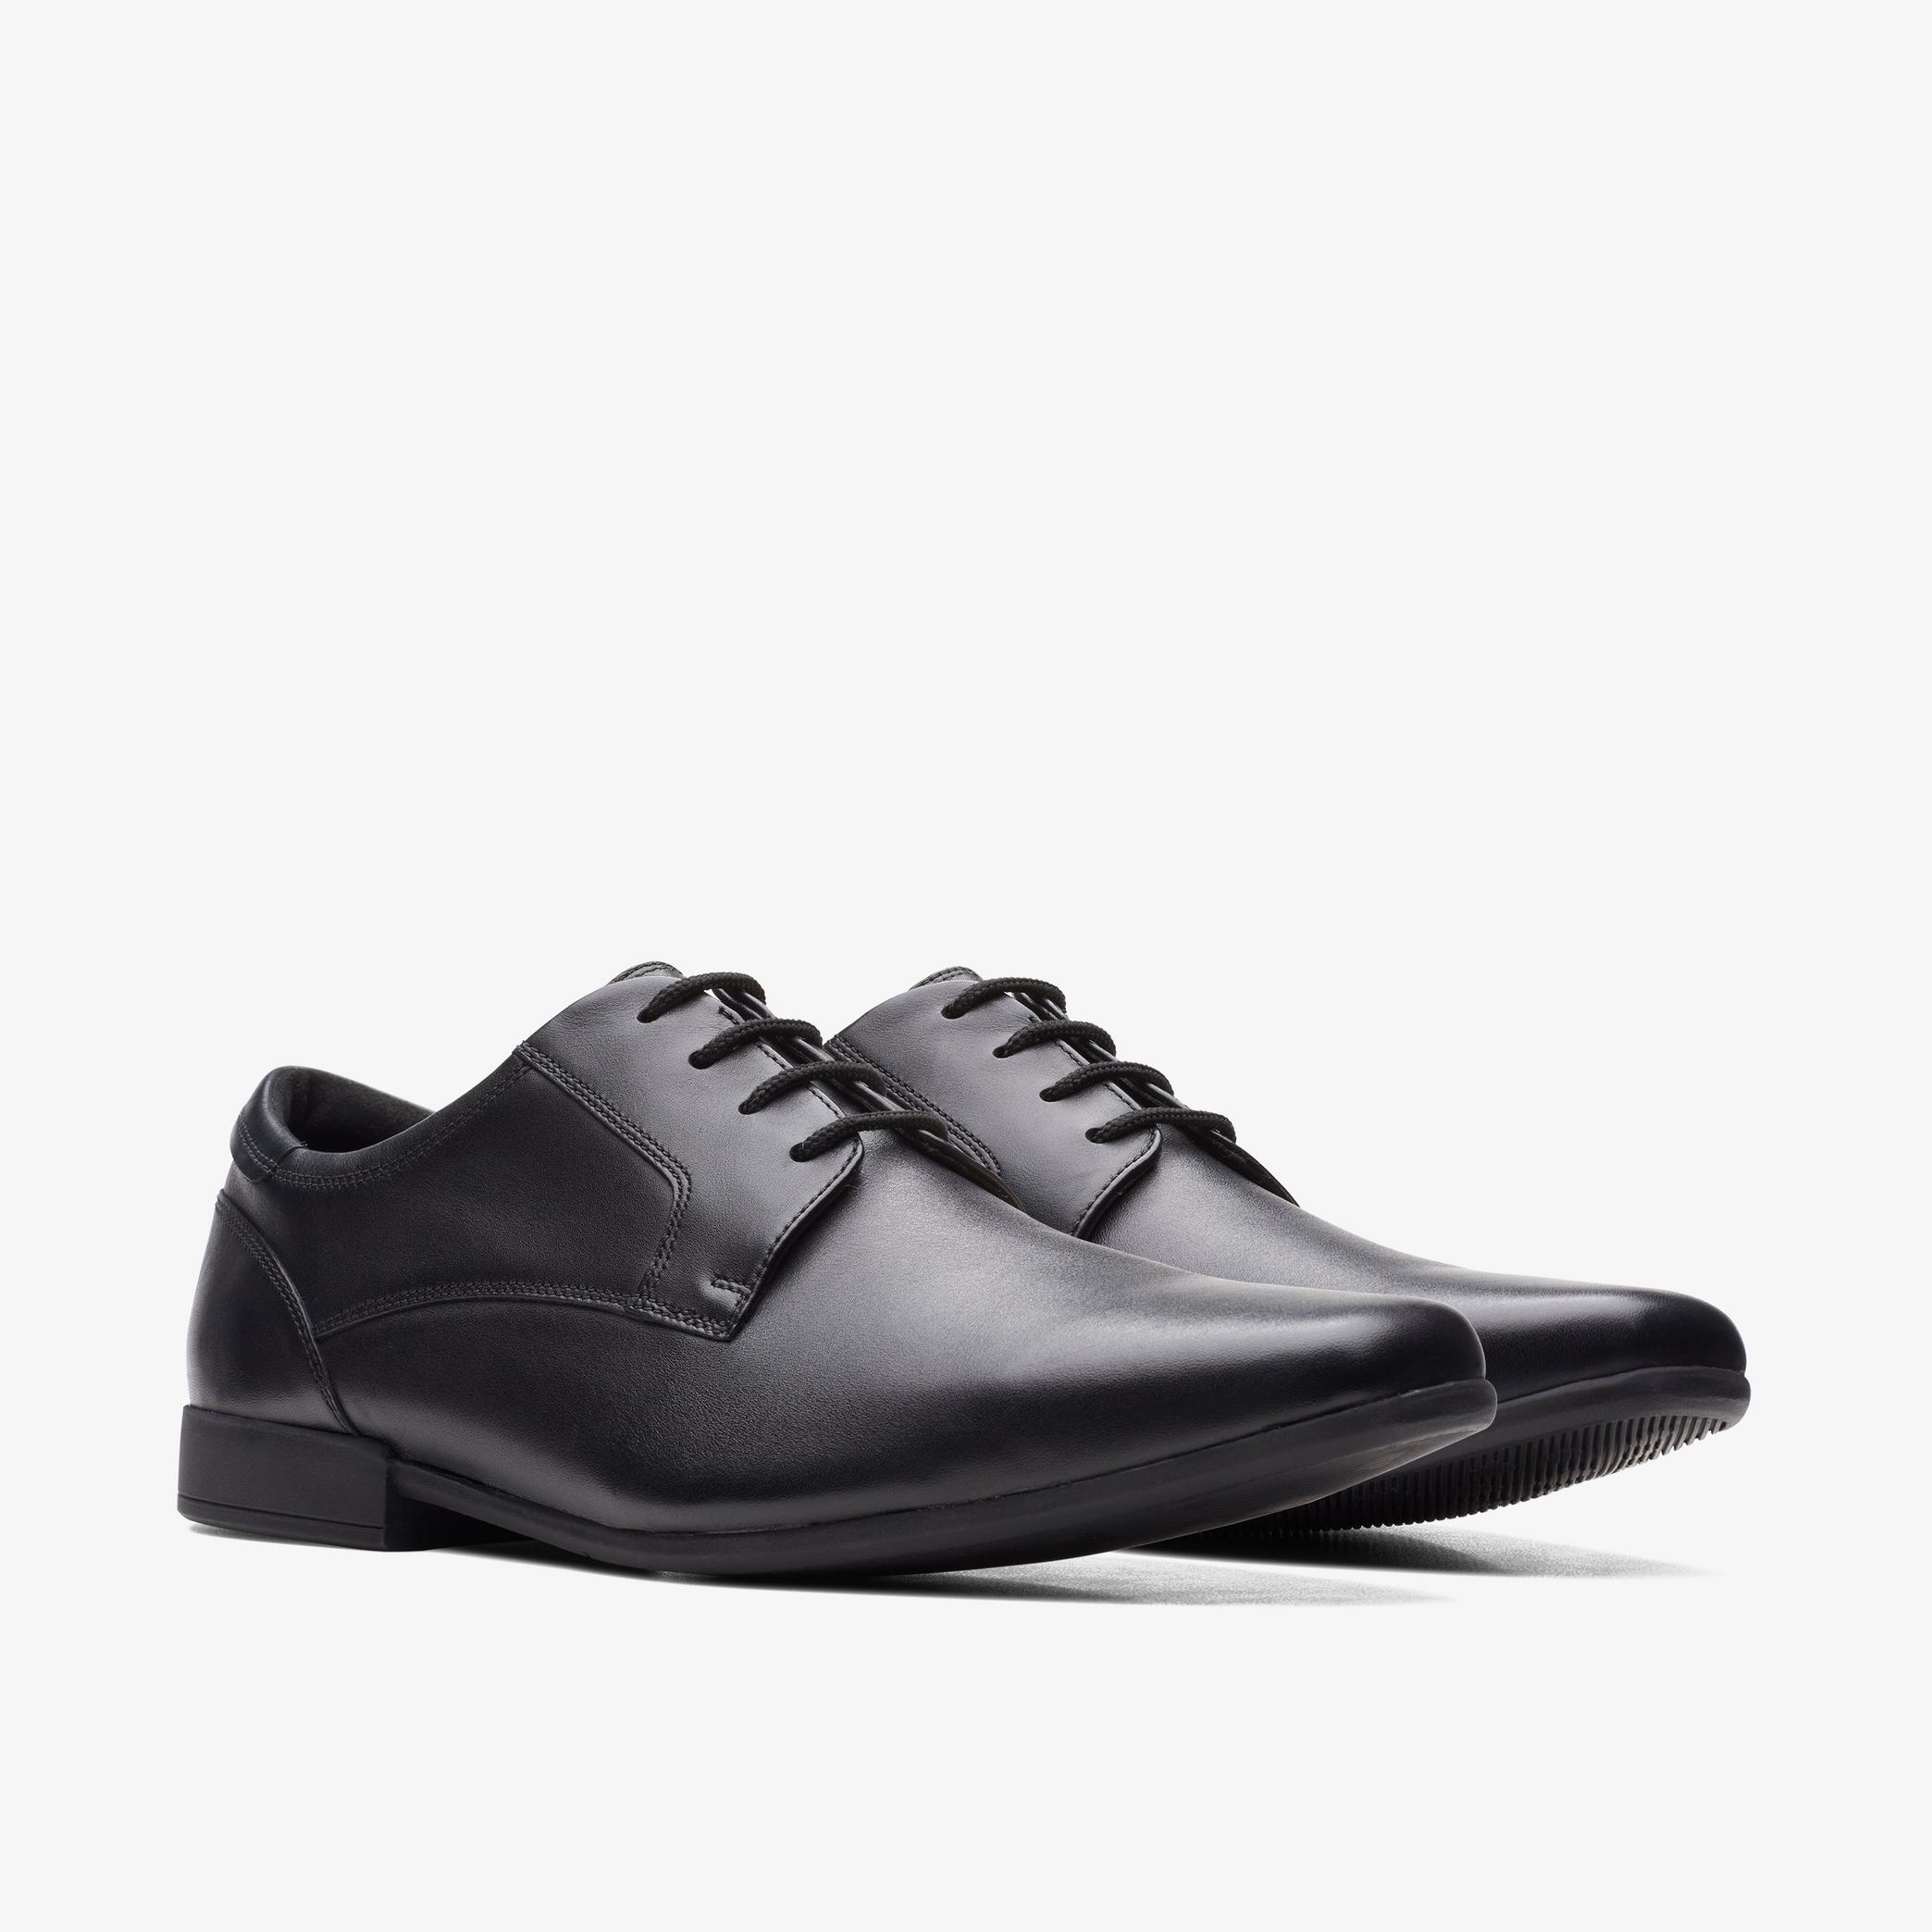 Sidton Lace Black Leather Derby Shoes, view 5 of 7